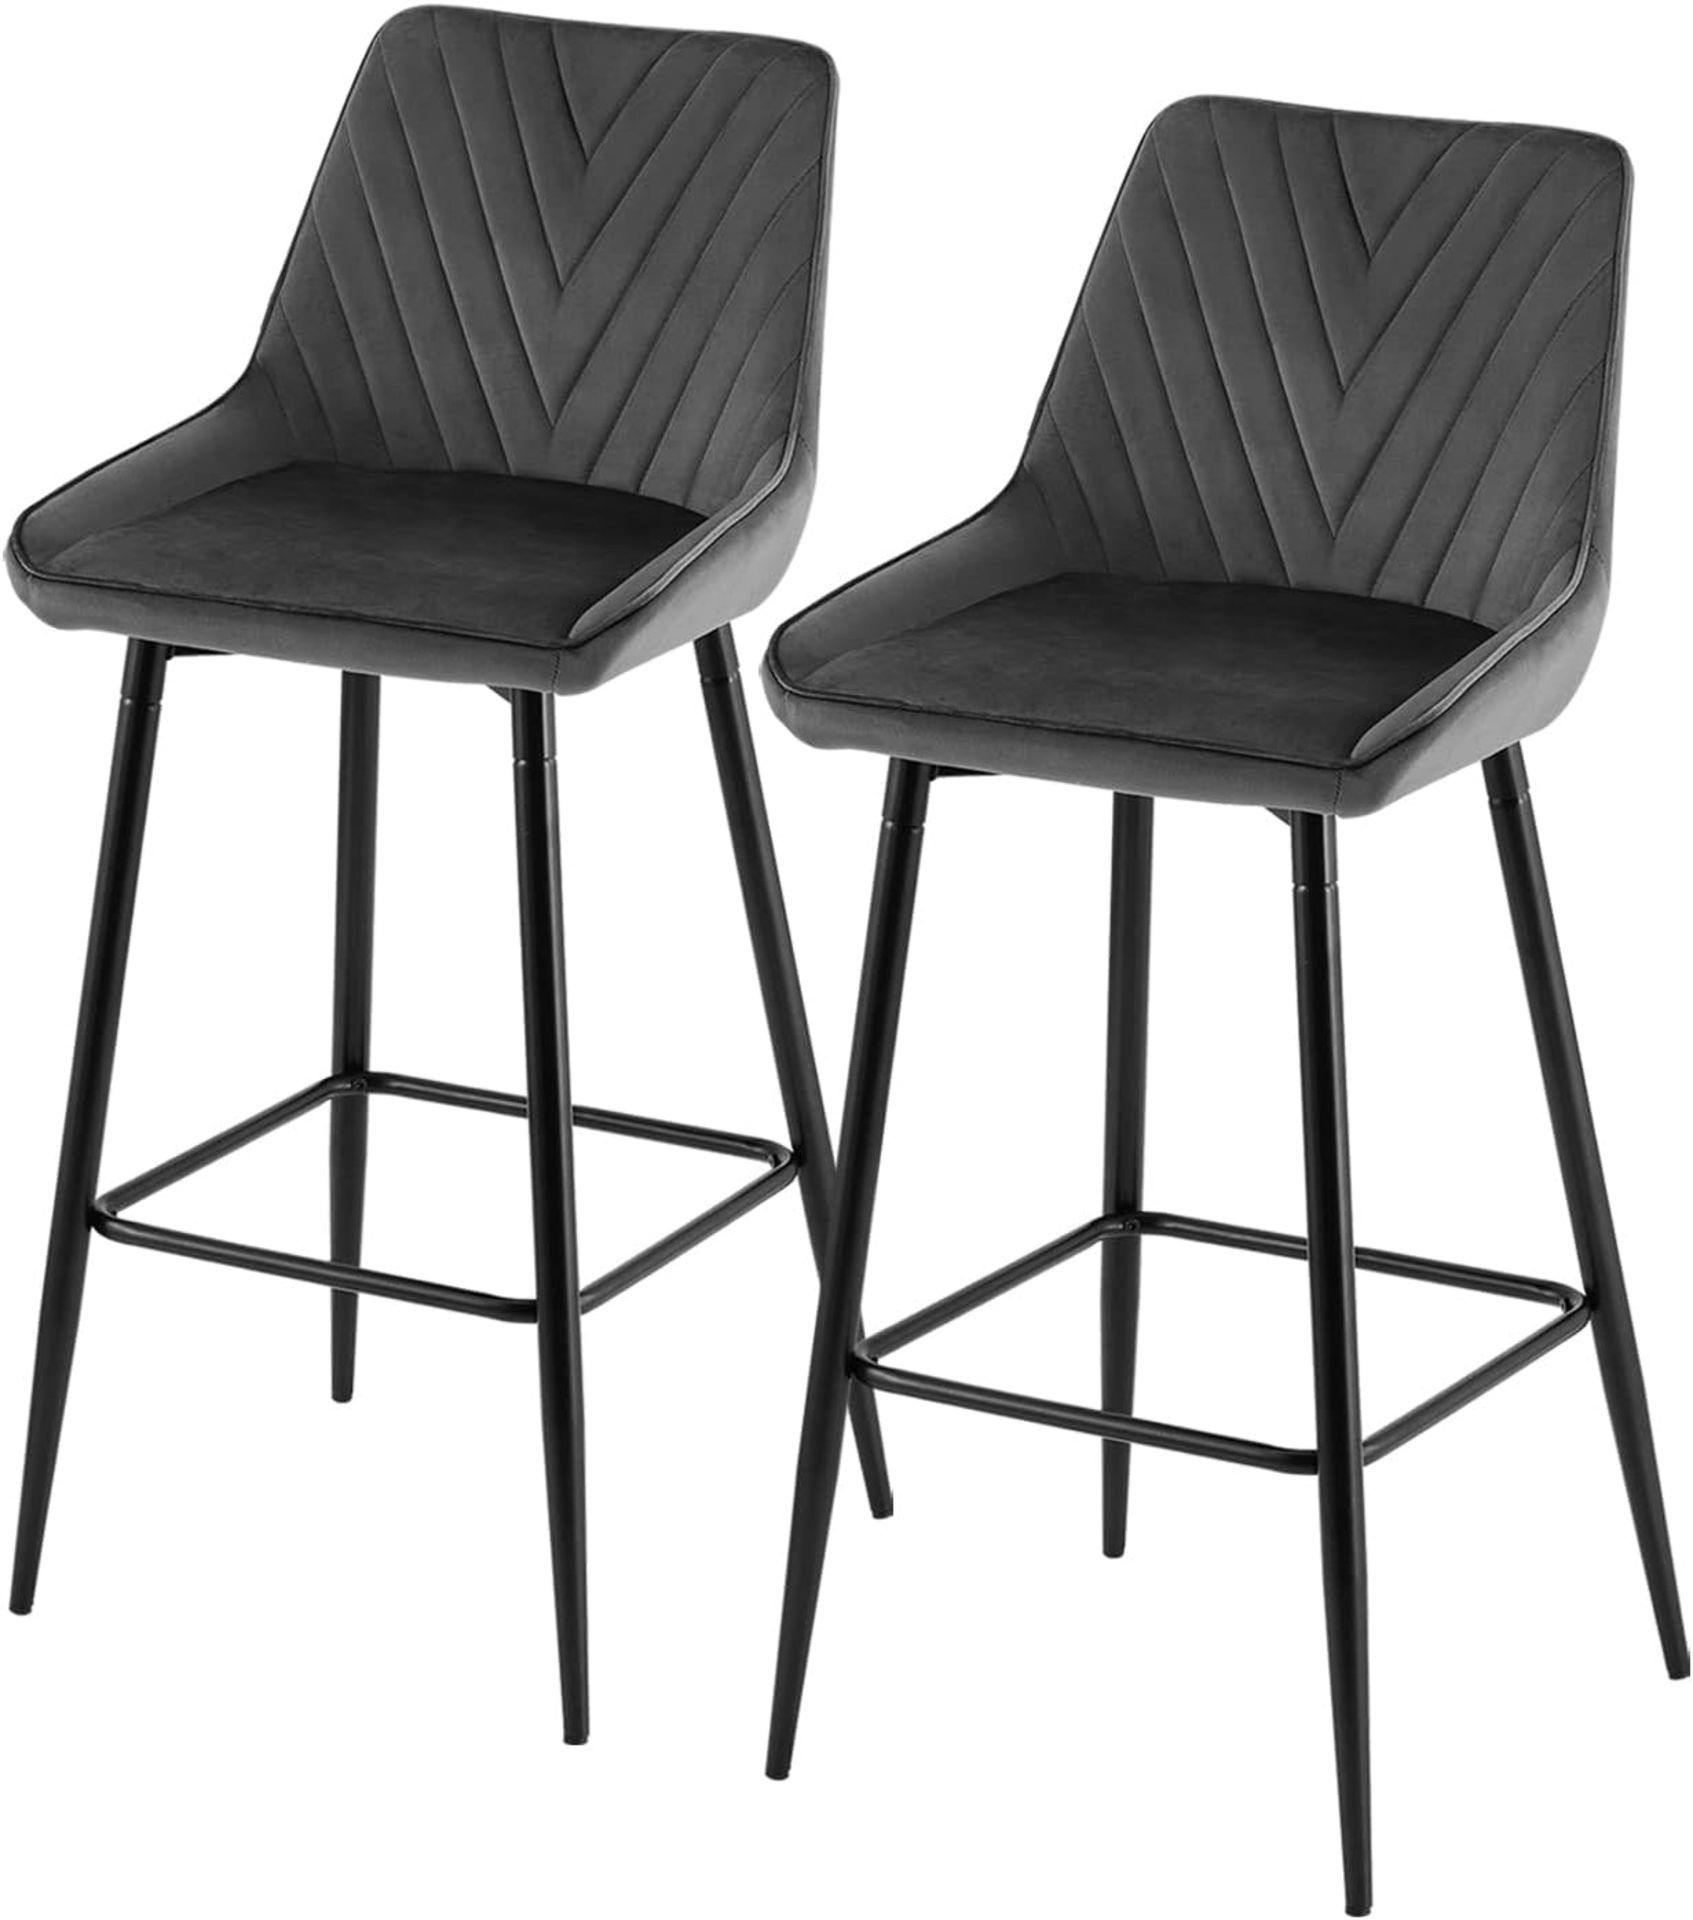 BRAND NEW SET OF 2 CLIPOP LUXURY DINING CHAIRS R5-2